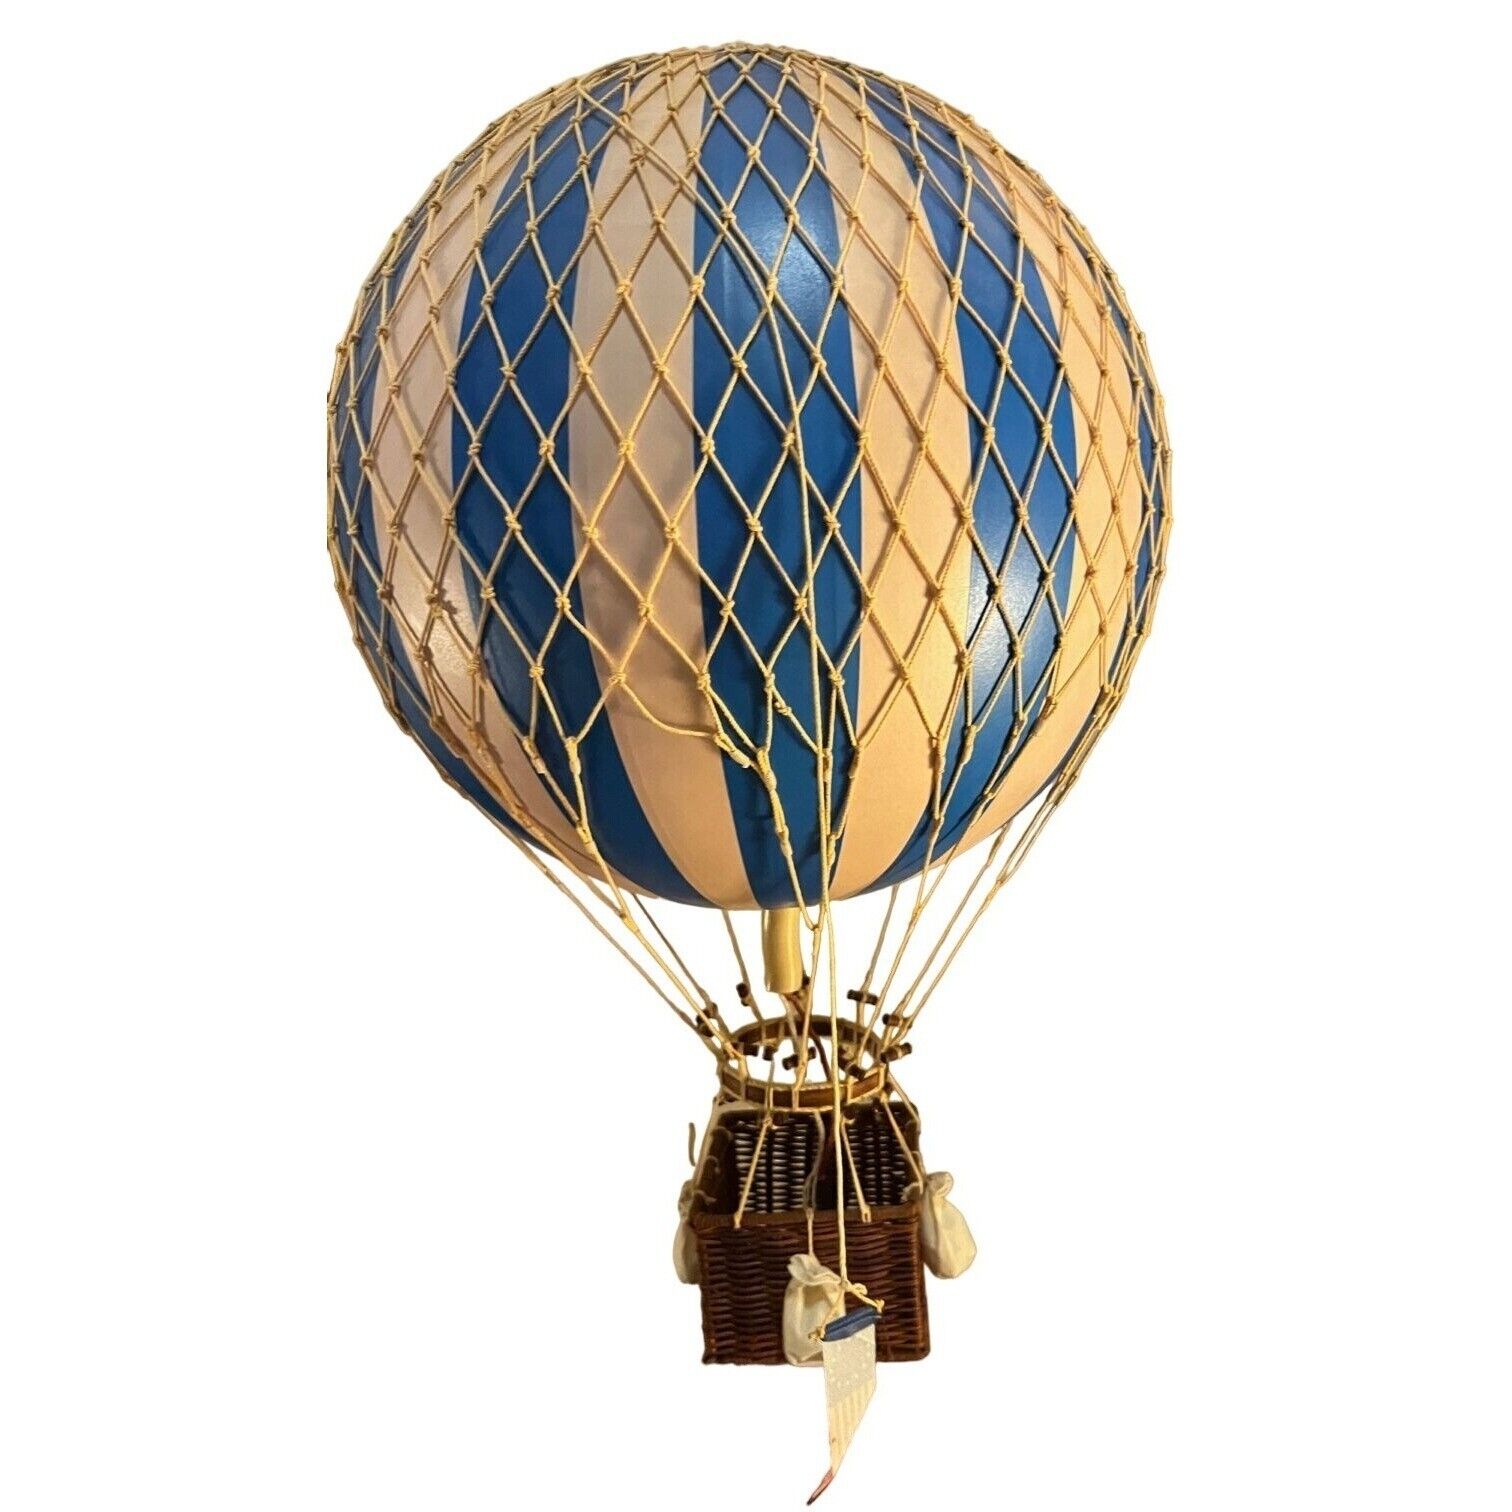 Aero Hot Air Balloon Authentic Model by Royal Designs, New in Box.